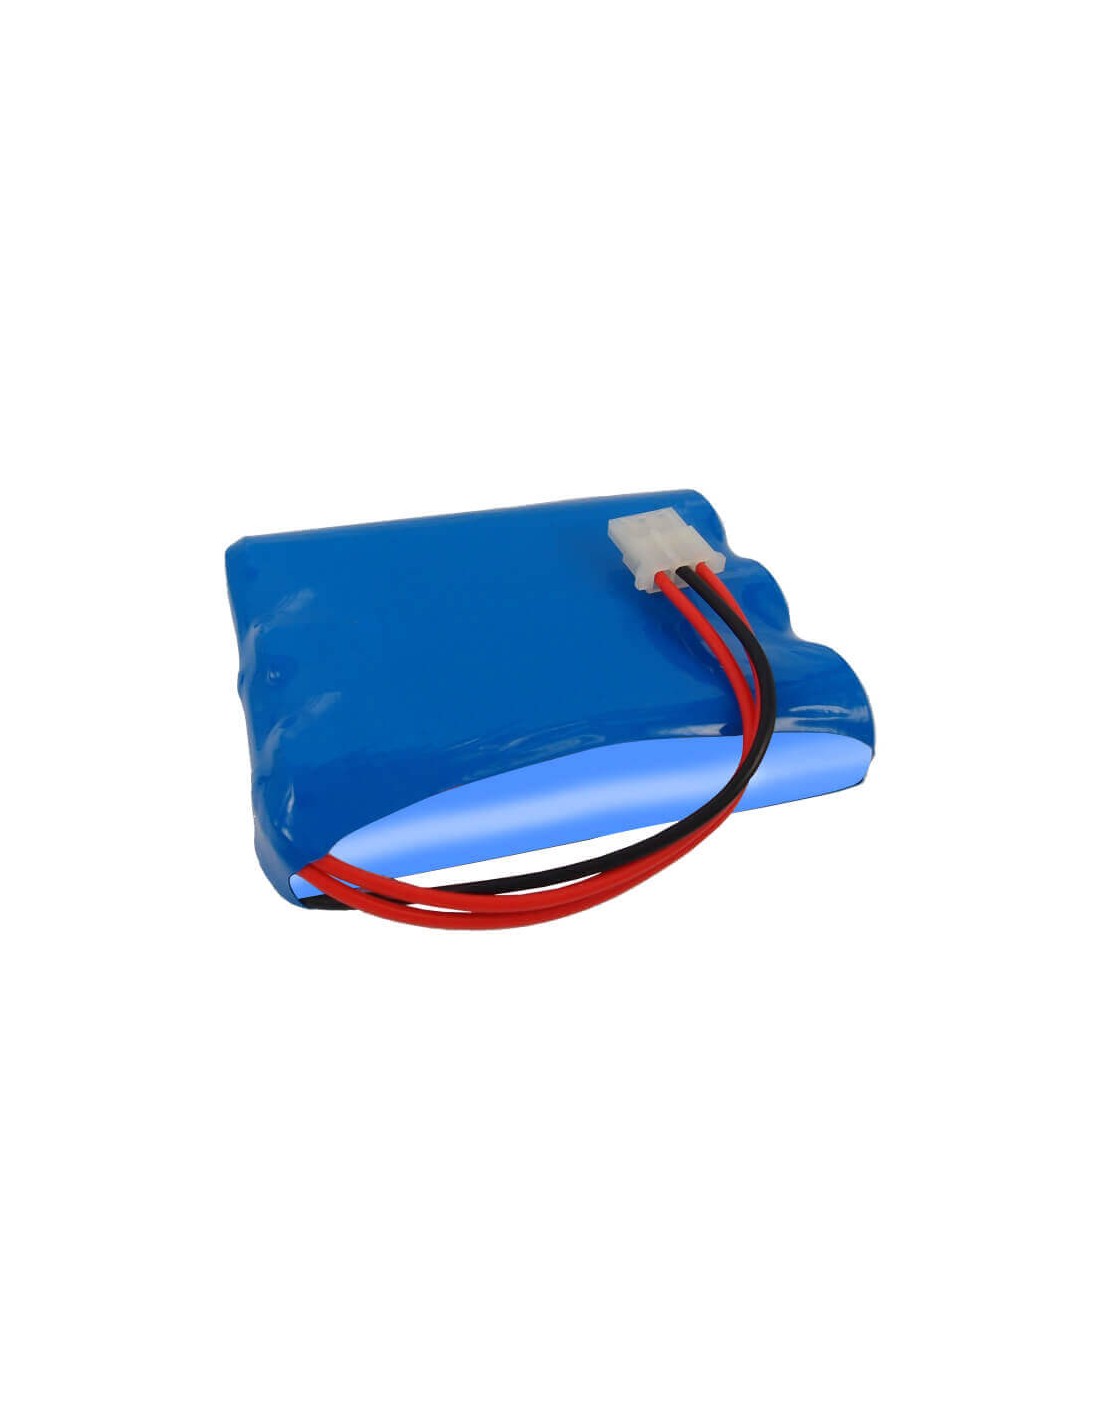 Battery for Agilent, 43100, 43100a, 43110a 12V, 2500mAh - 30.00Wh